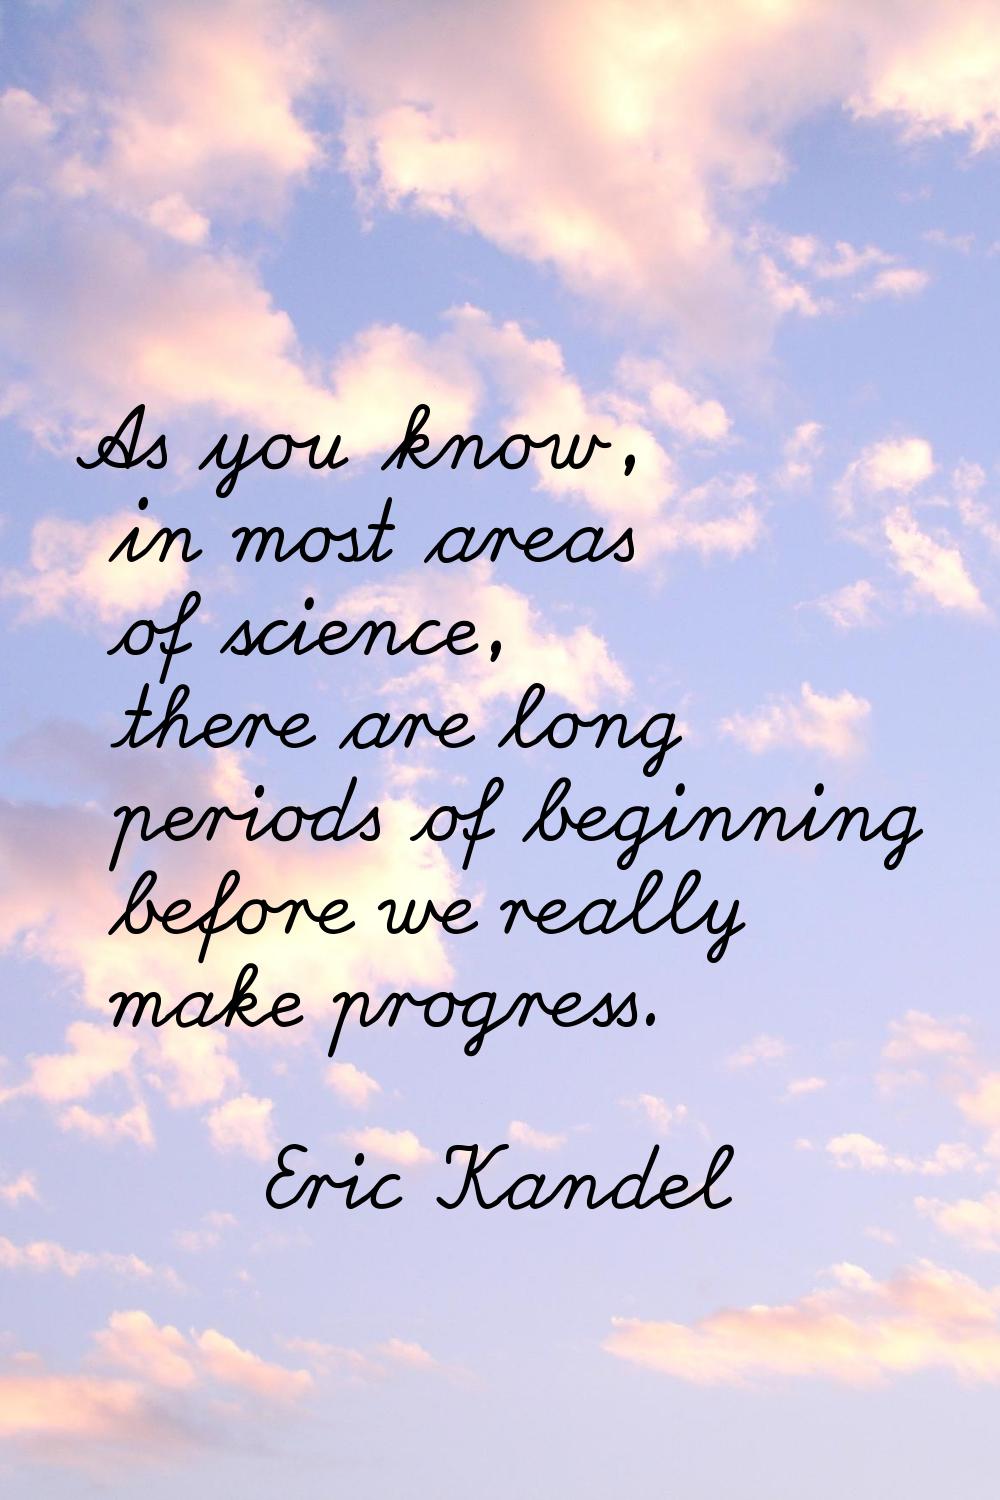 As you know, in most areas of science, there are long periods of beginning before we really make pr